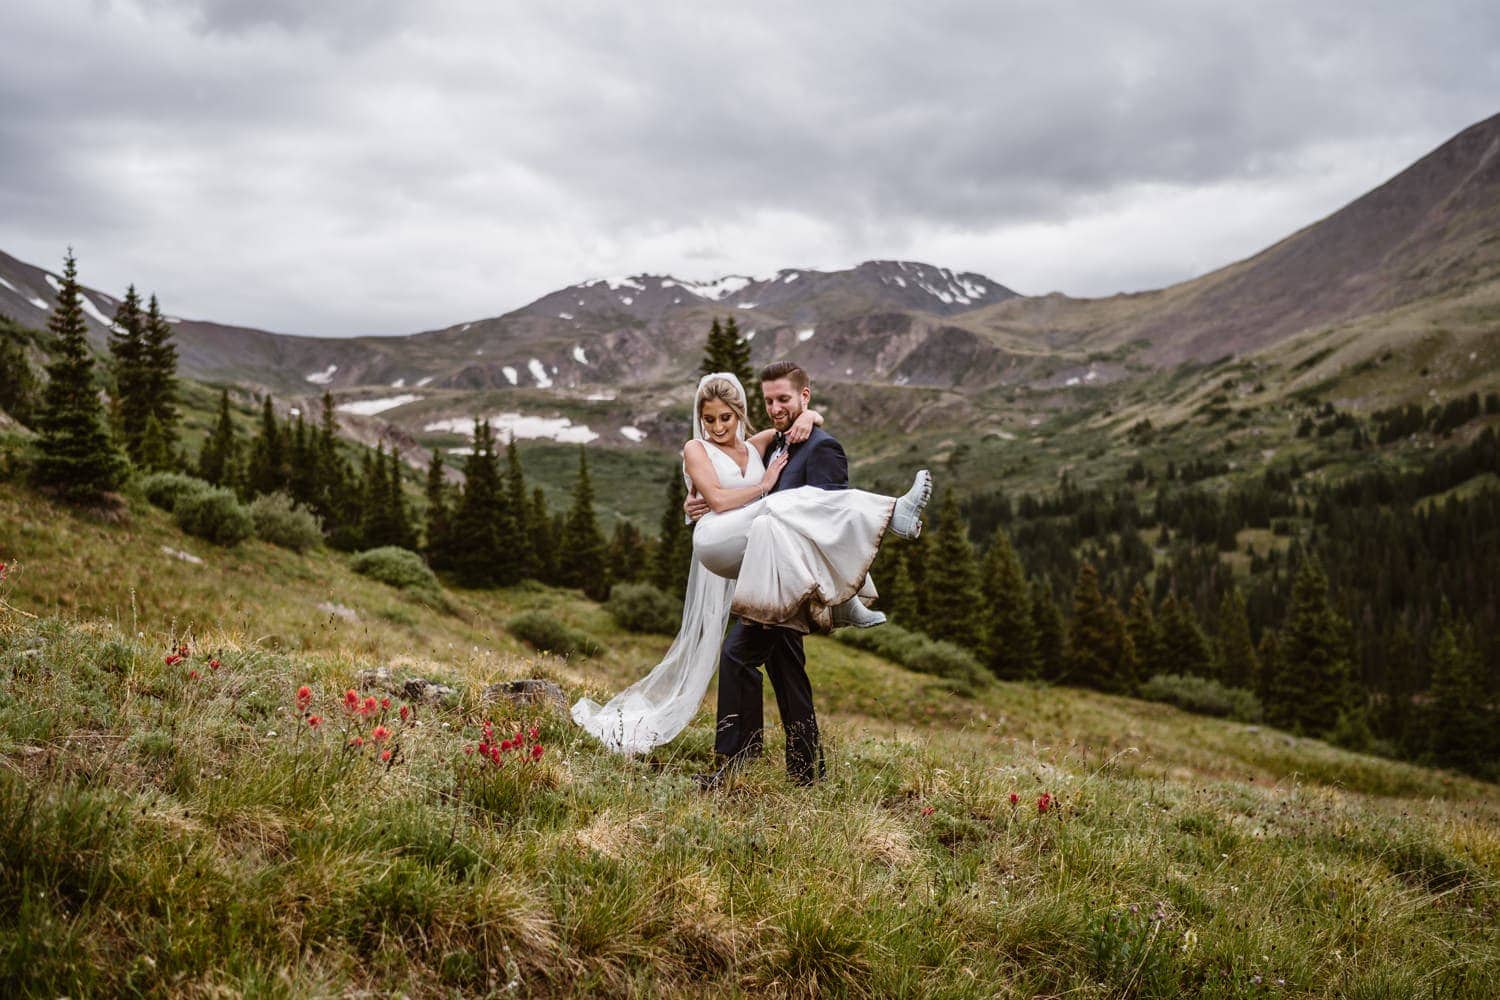 Groom carrying wife in his arms surrounded by the mountains.